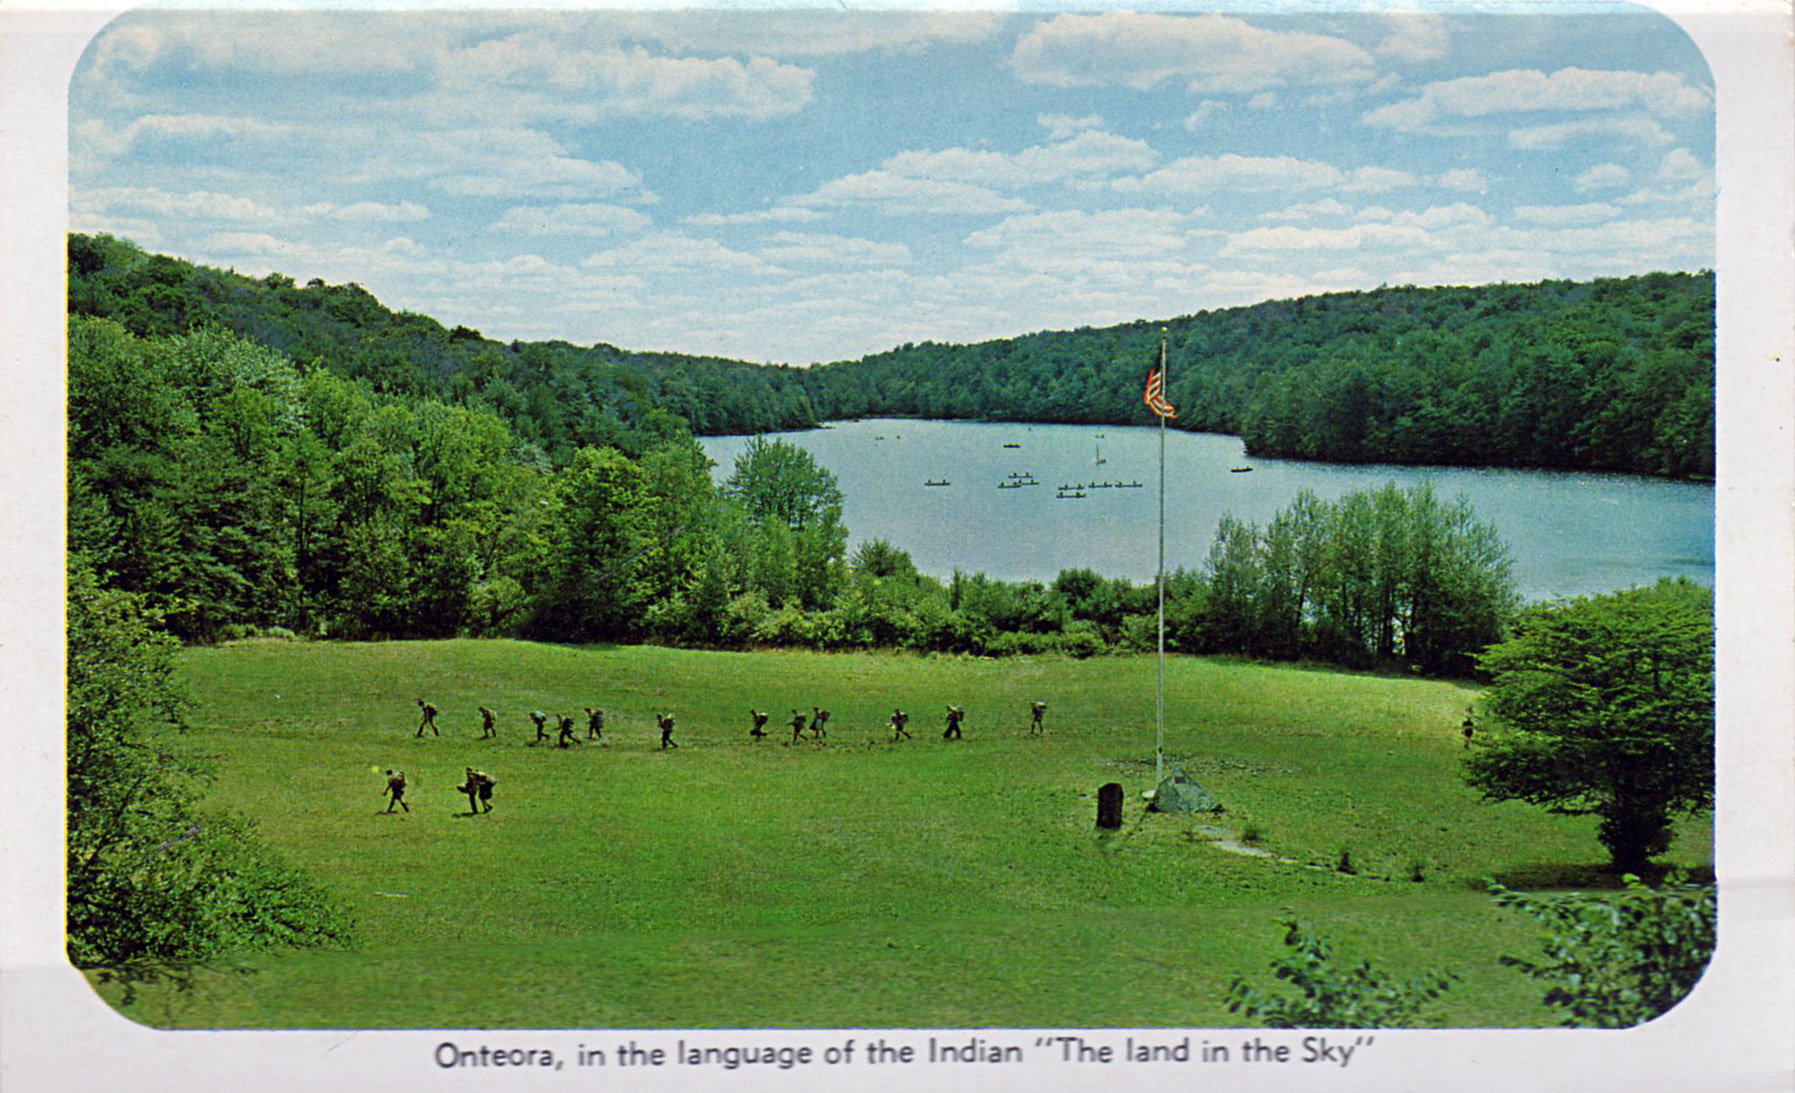 Onteora, in the language of the Indian, "The Land in the Sky"